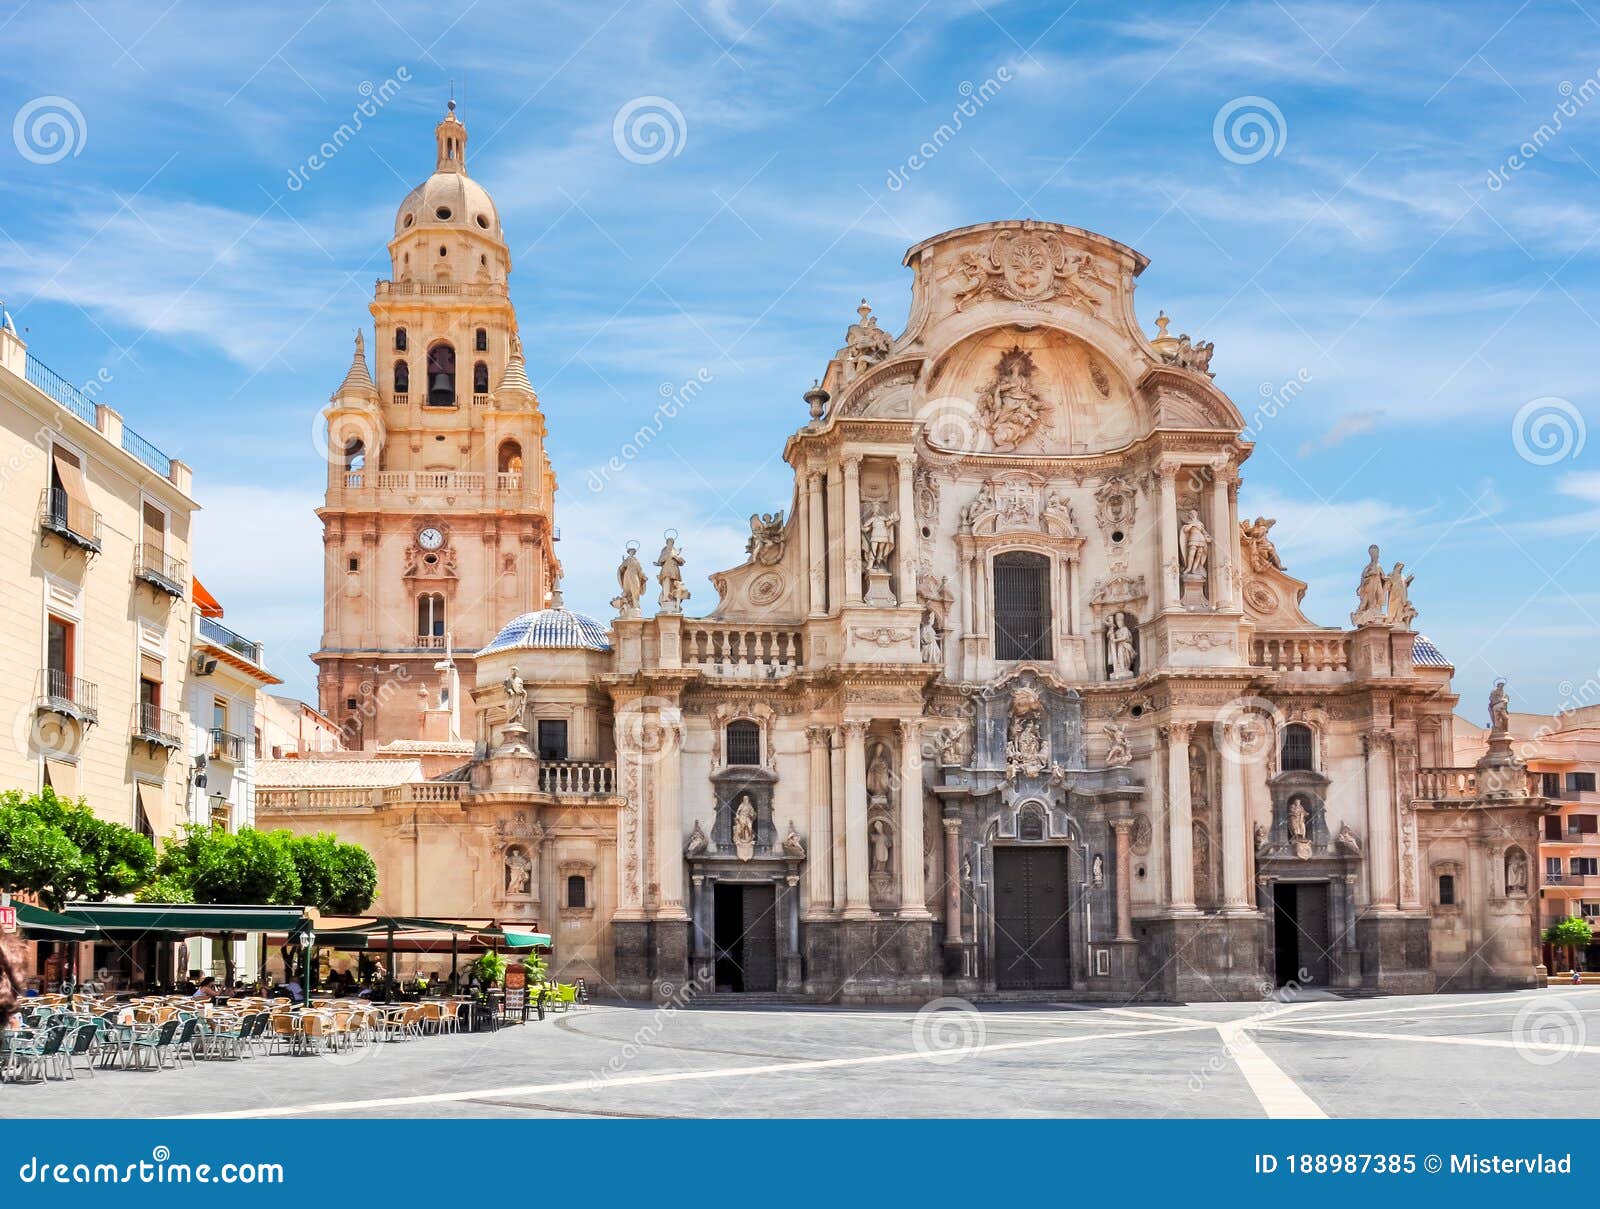 cathedral church of saint mary in center of murcia, spain